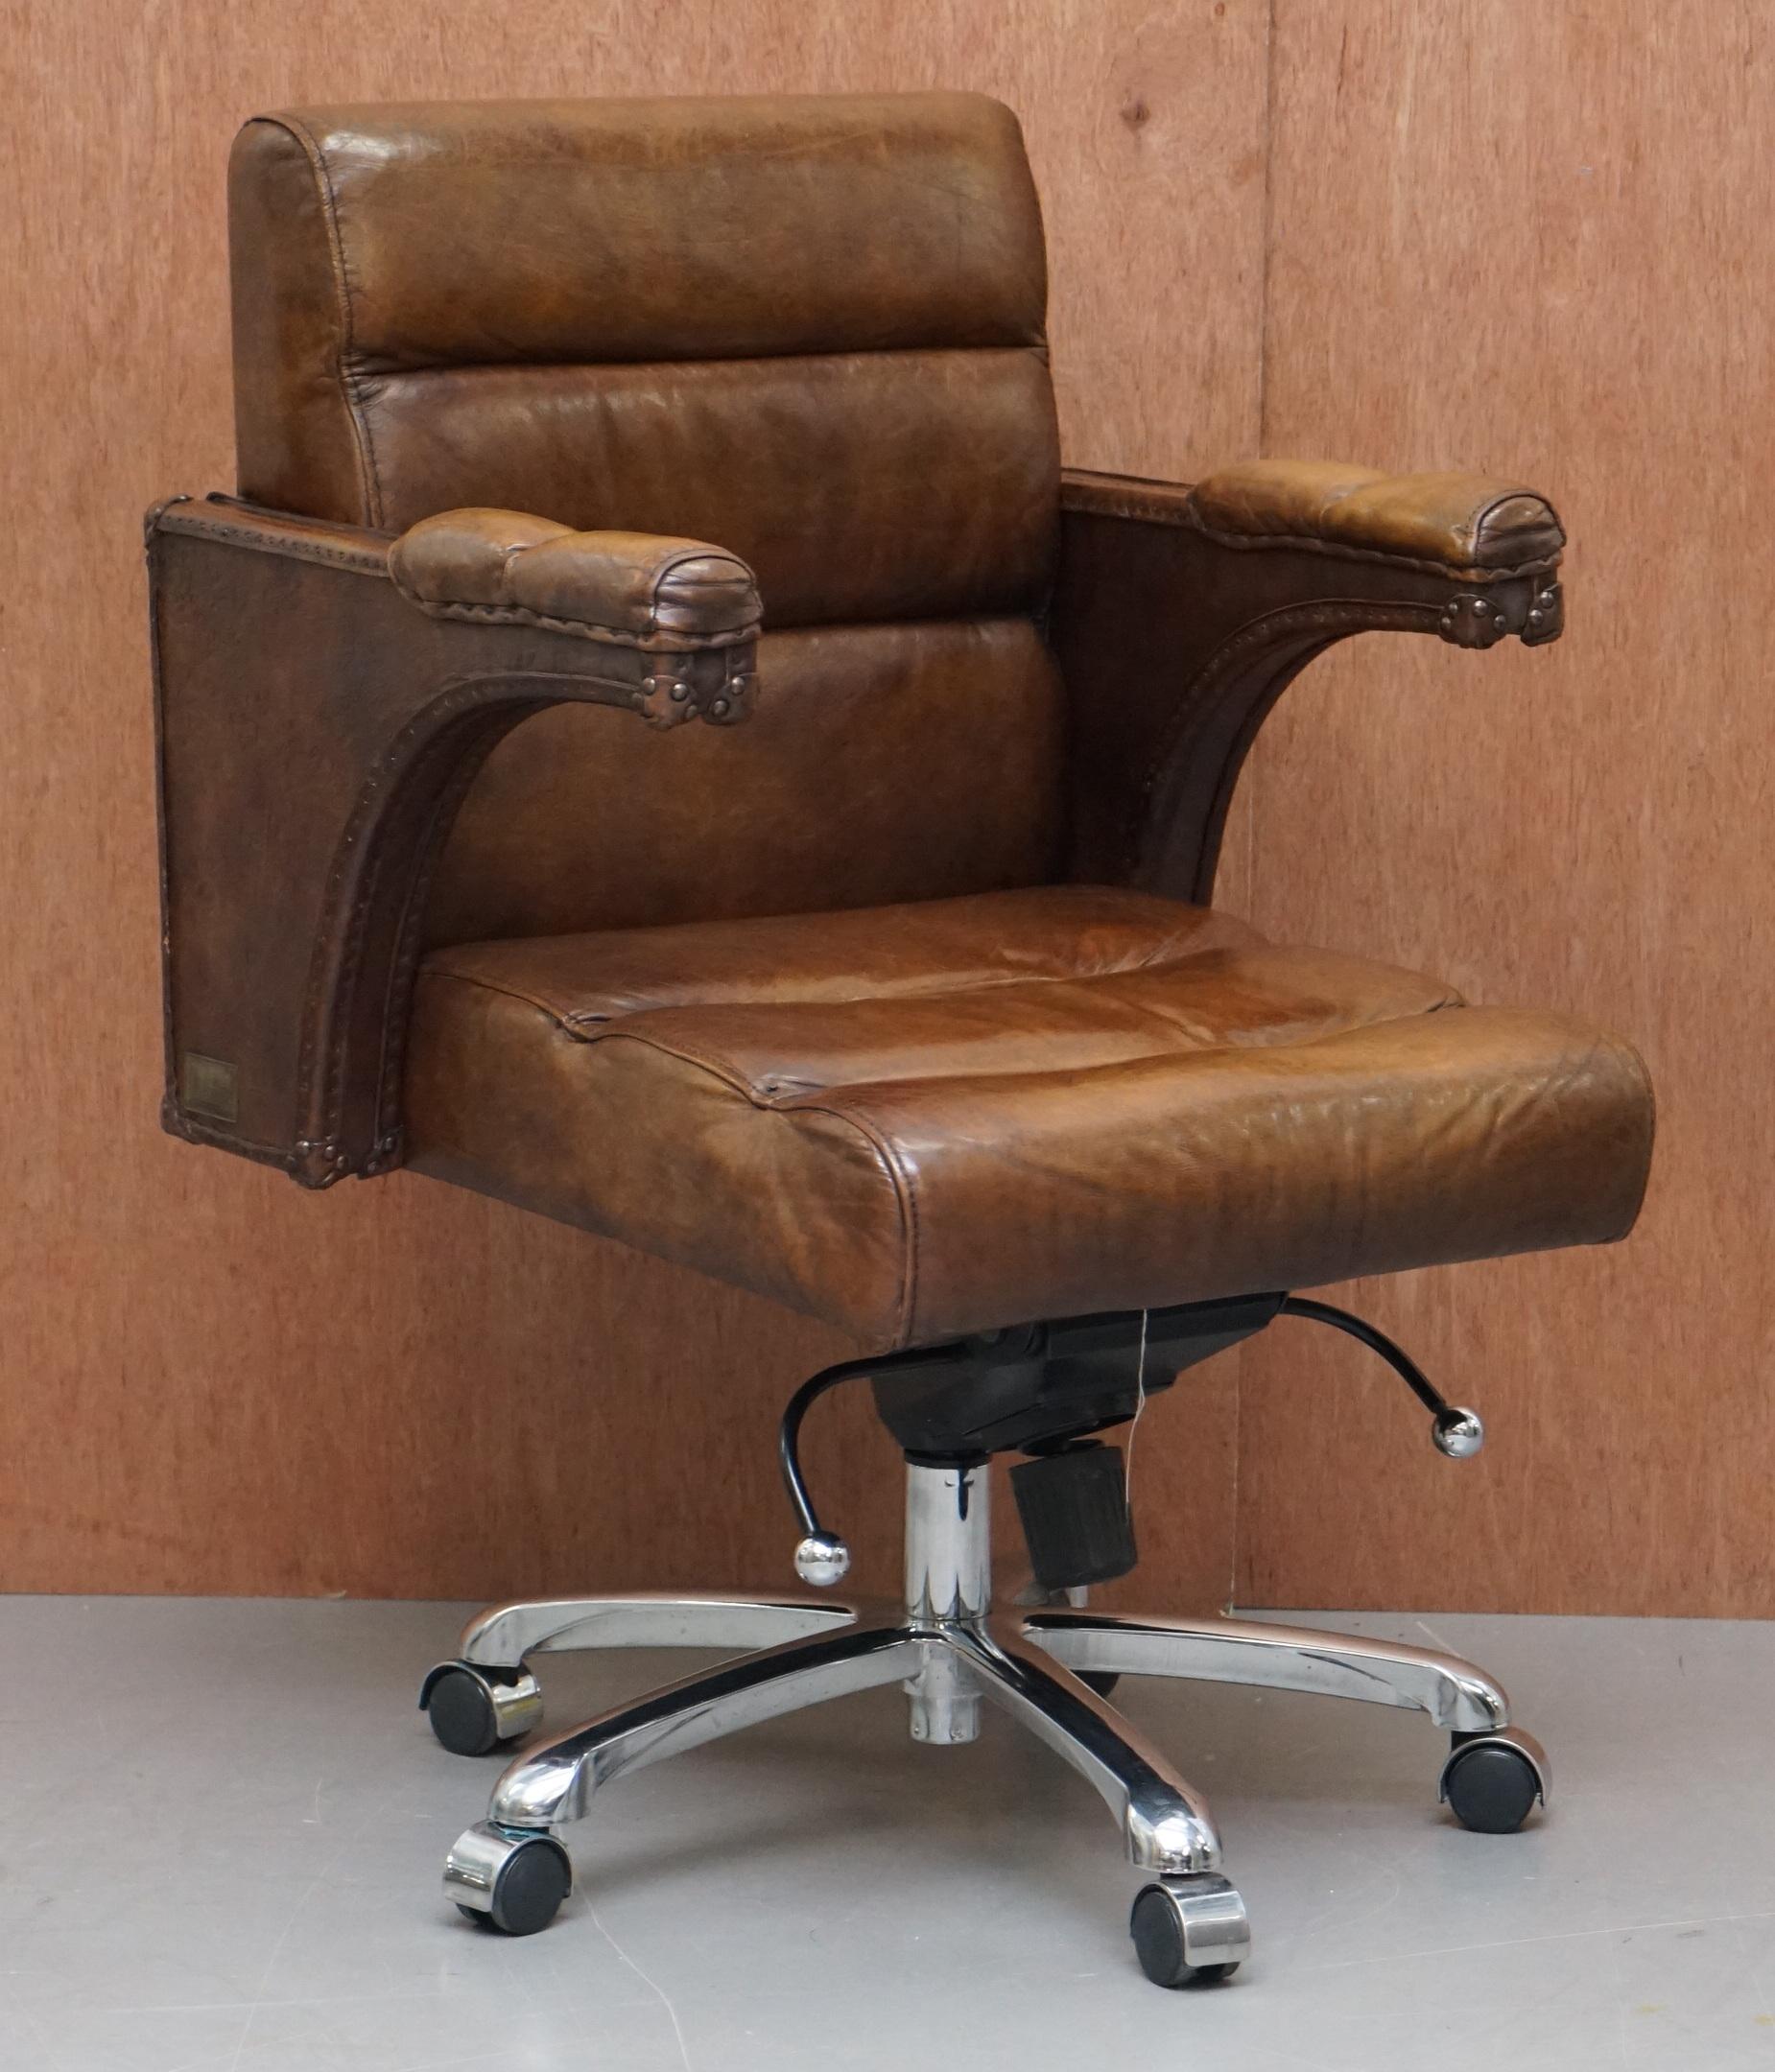 We are delighted to offer for sale this stunning saddle tan brown heritage leather office chair, extremely comfortable 

A seriously good looking and well made chair. Upholstered with hand dyed saddle leather, it has a LV luggage look and feel to